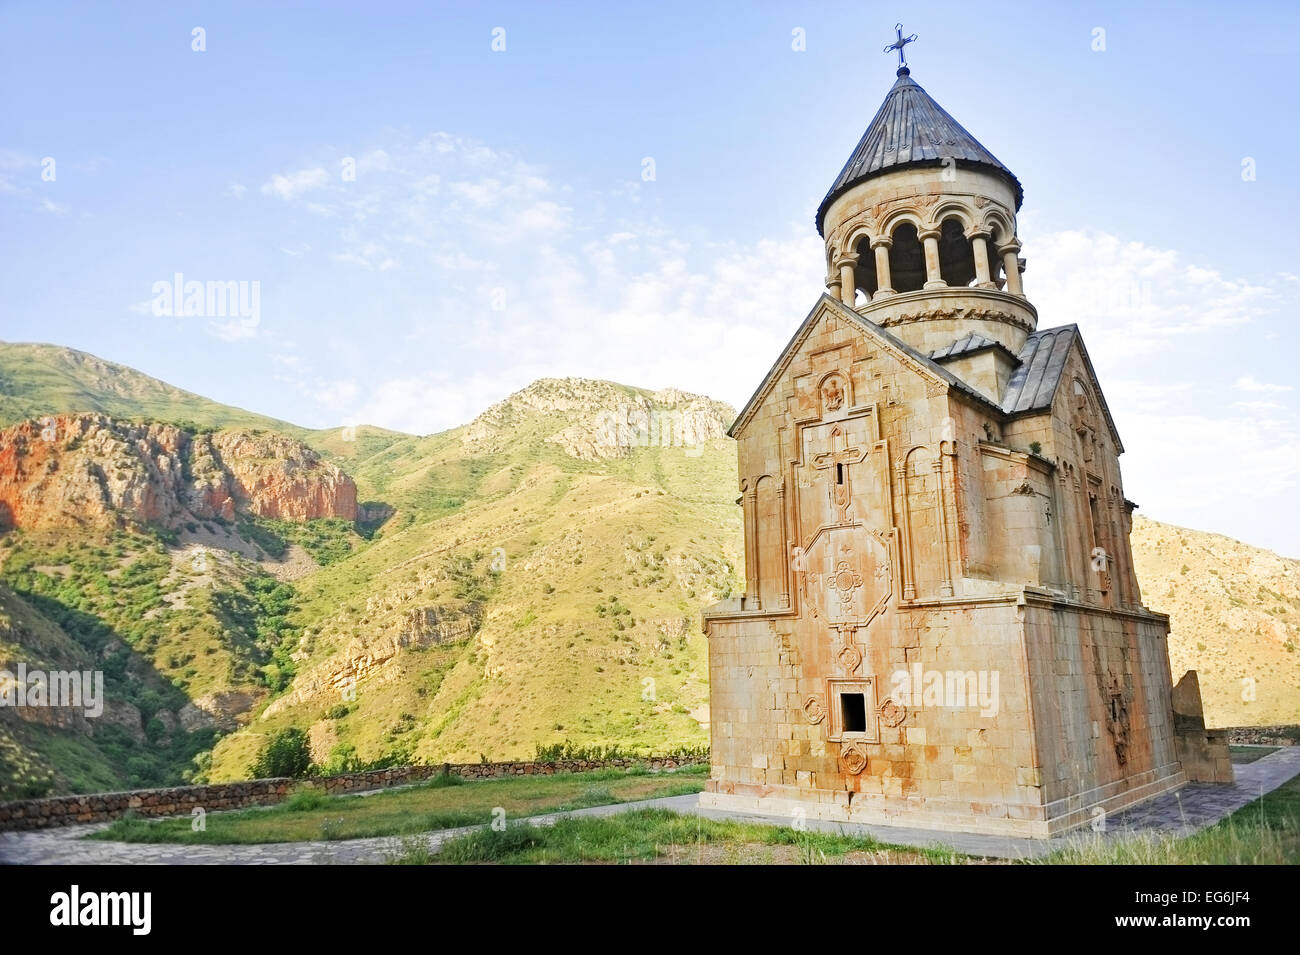 Architecture shot with ancient Noravank monastery in Armenia Stock Photo